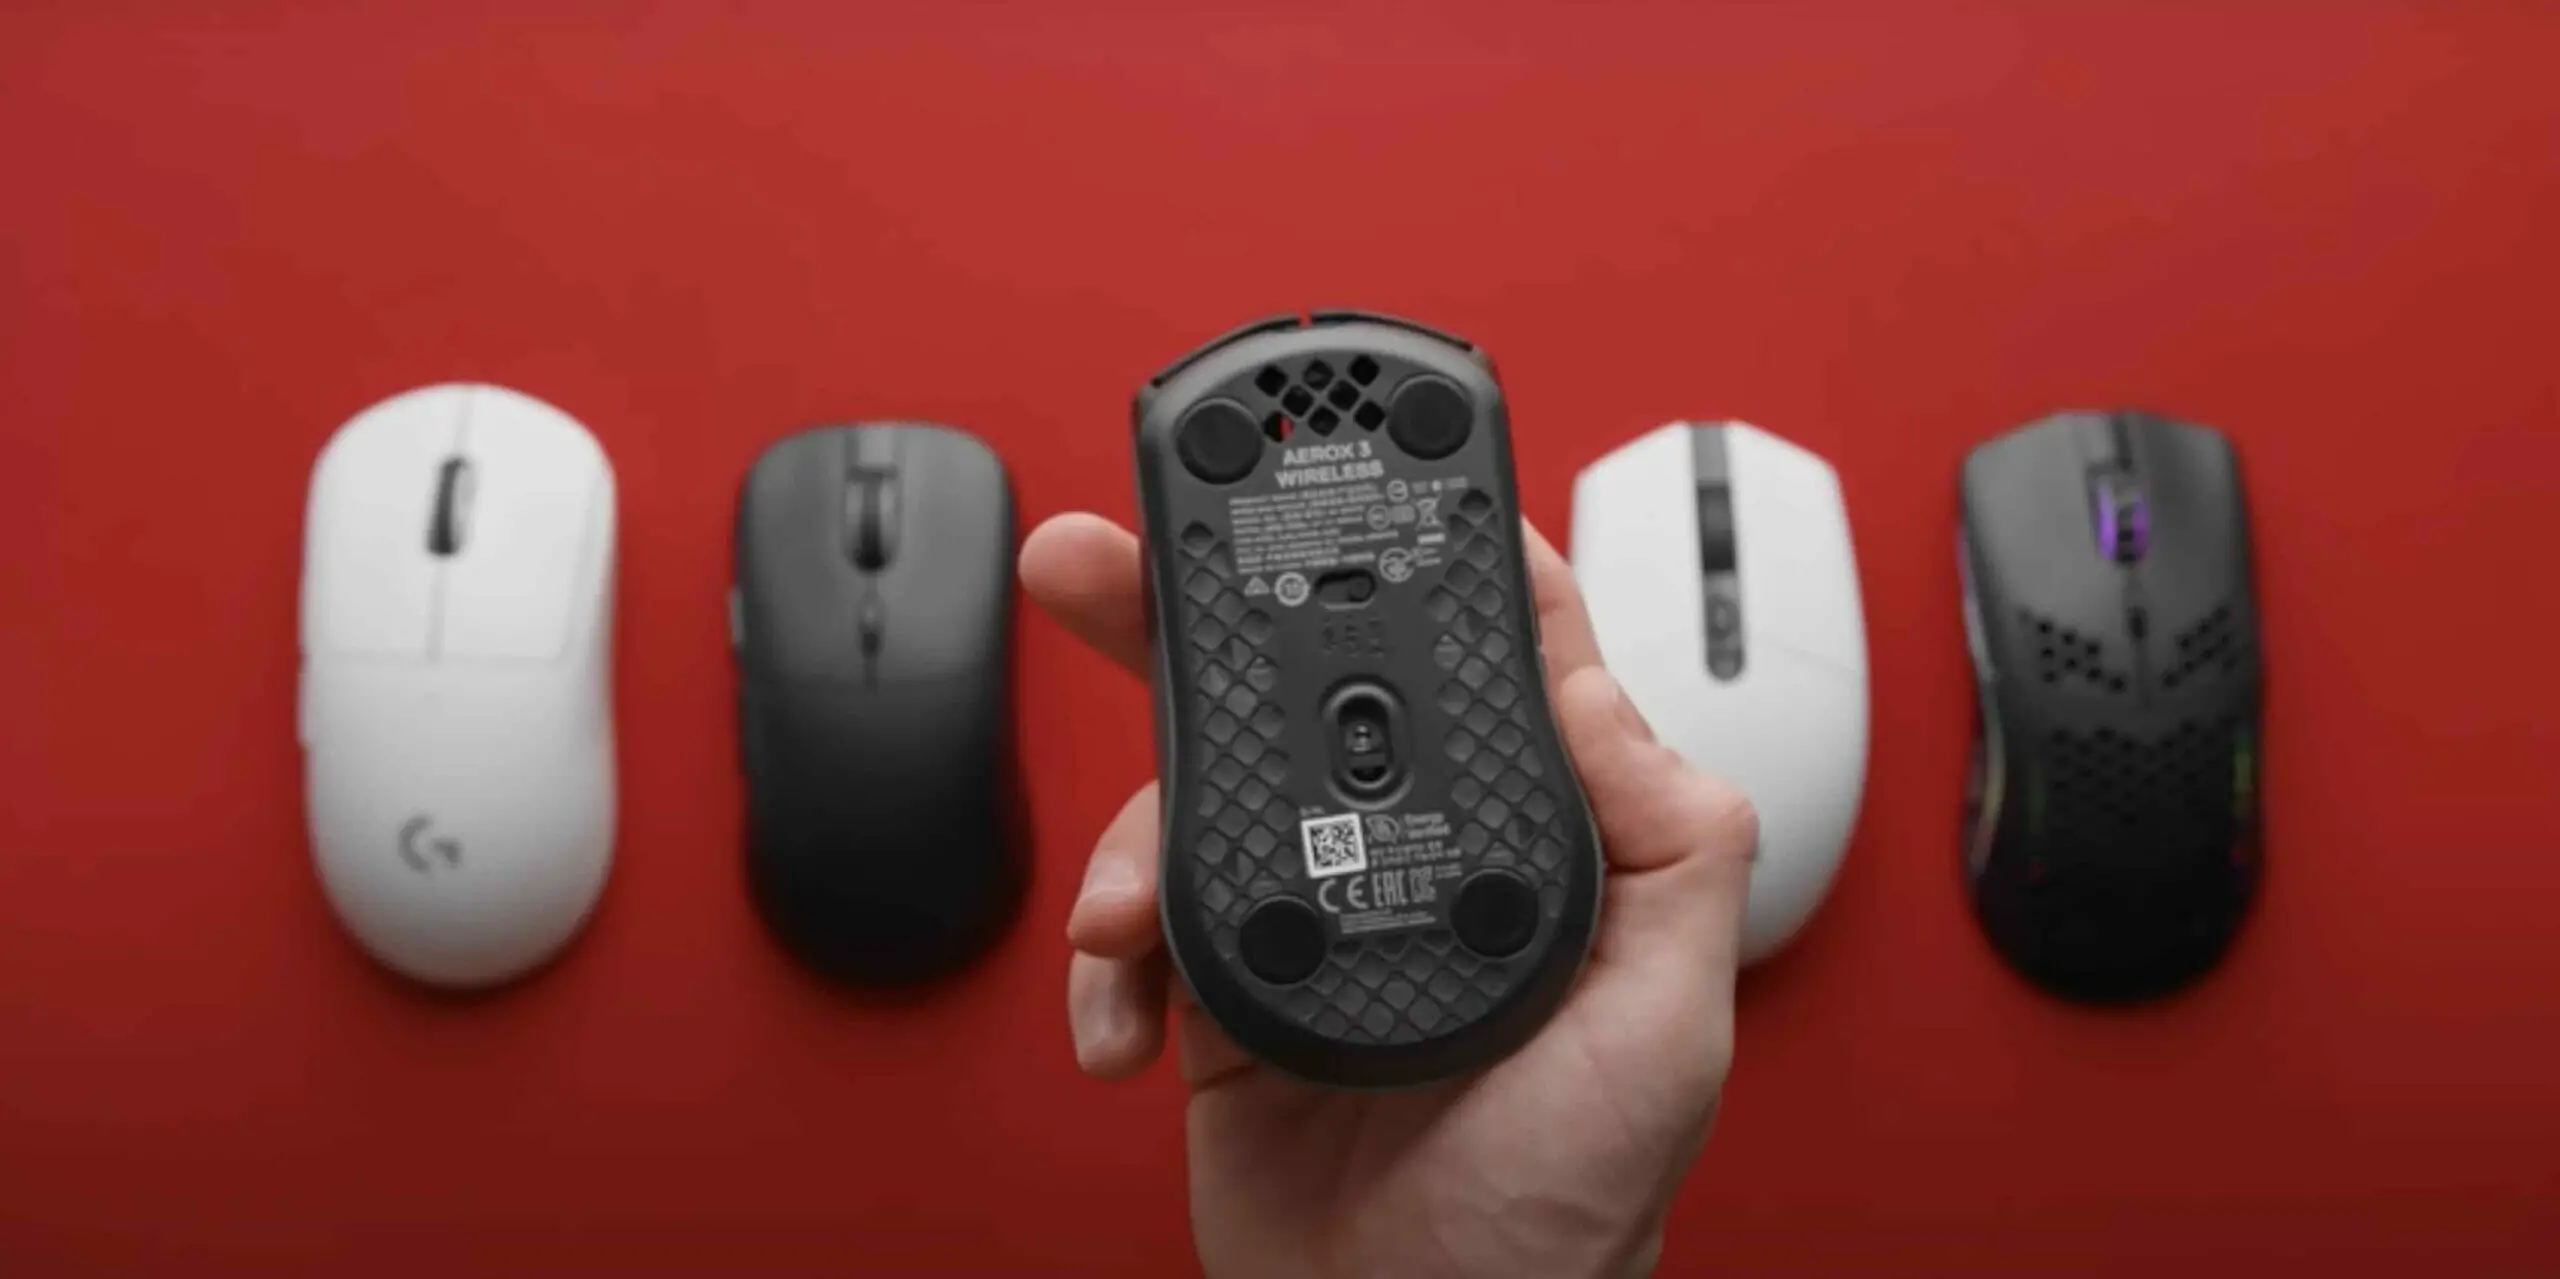 group of wireless mouse in a red background and 1 mouse is being held by a man's hand